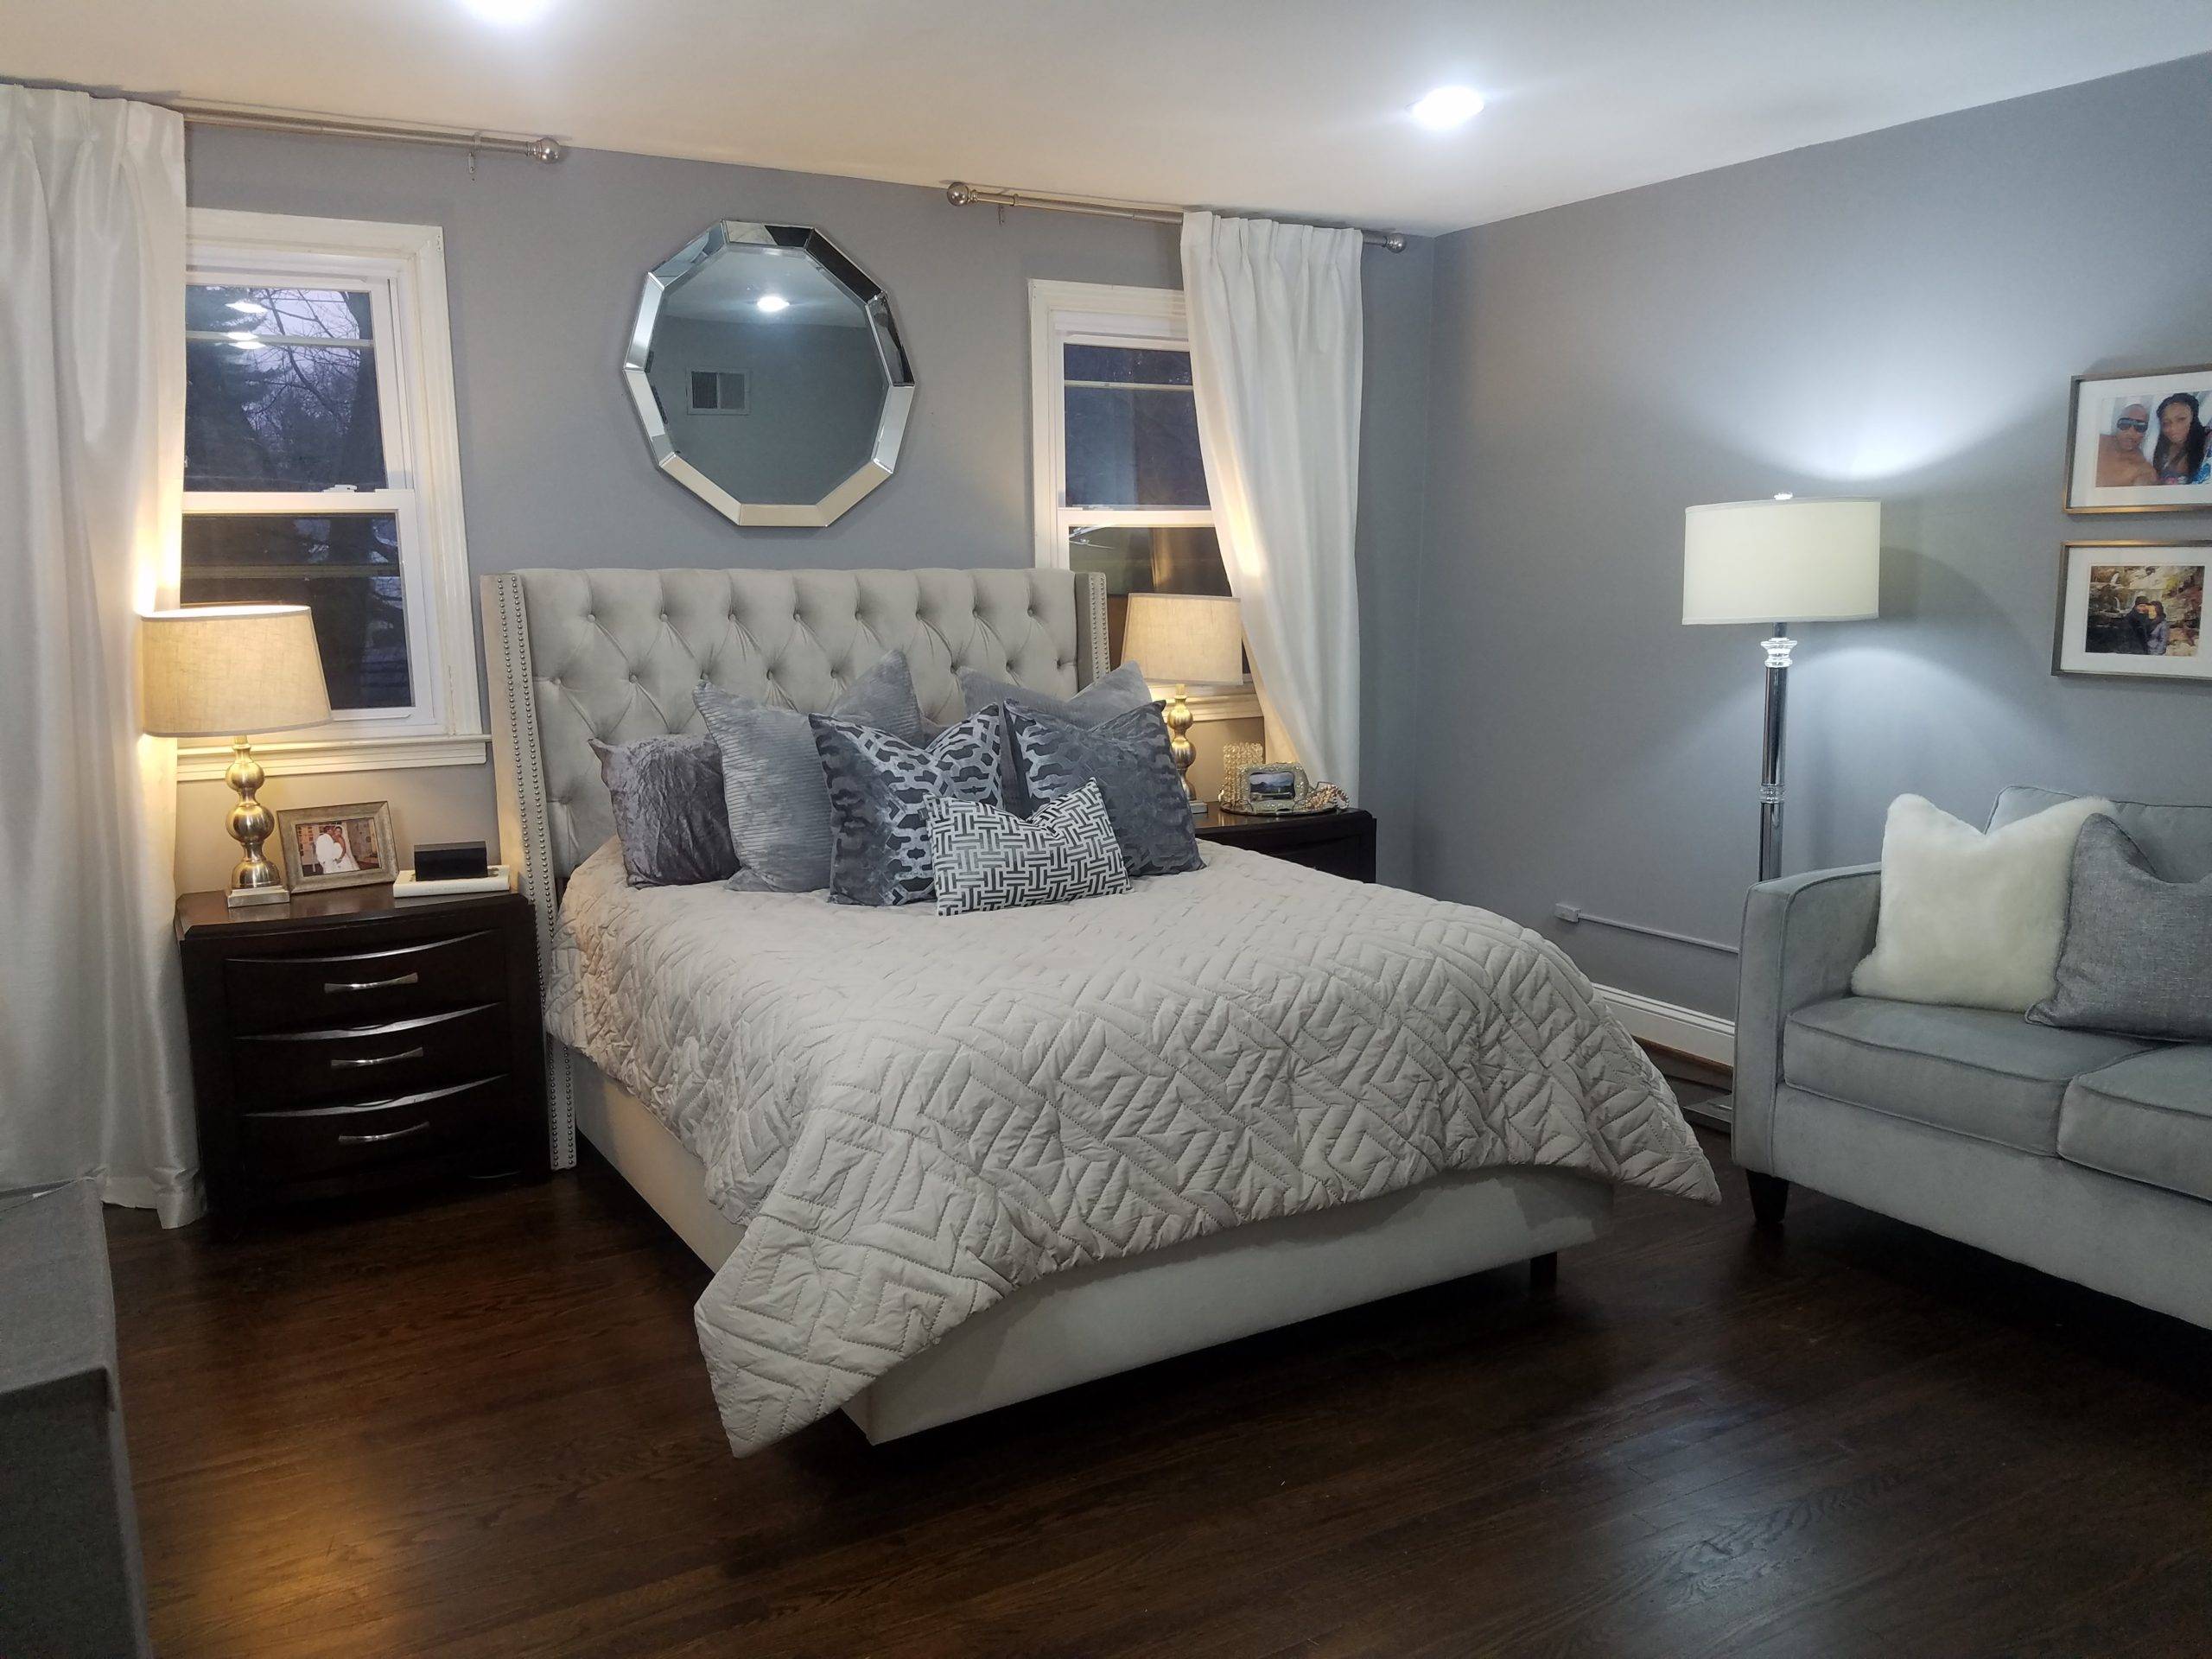 blue bedroom with silver decor and wood flooring